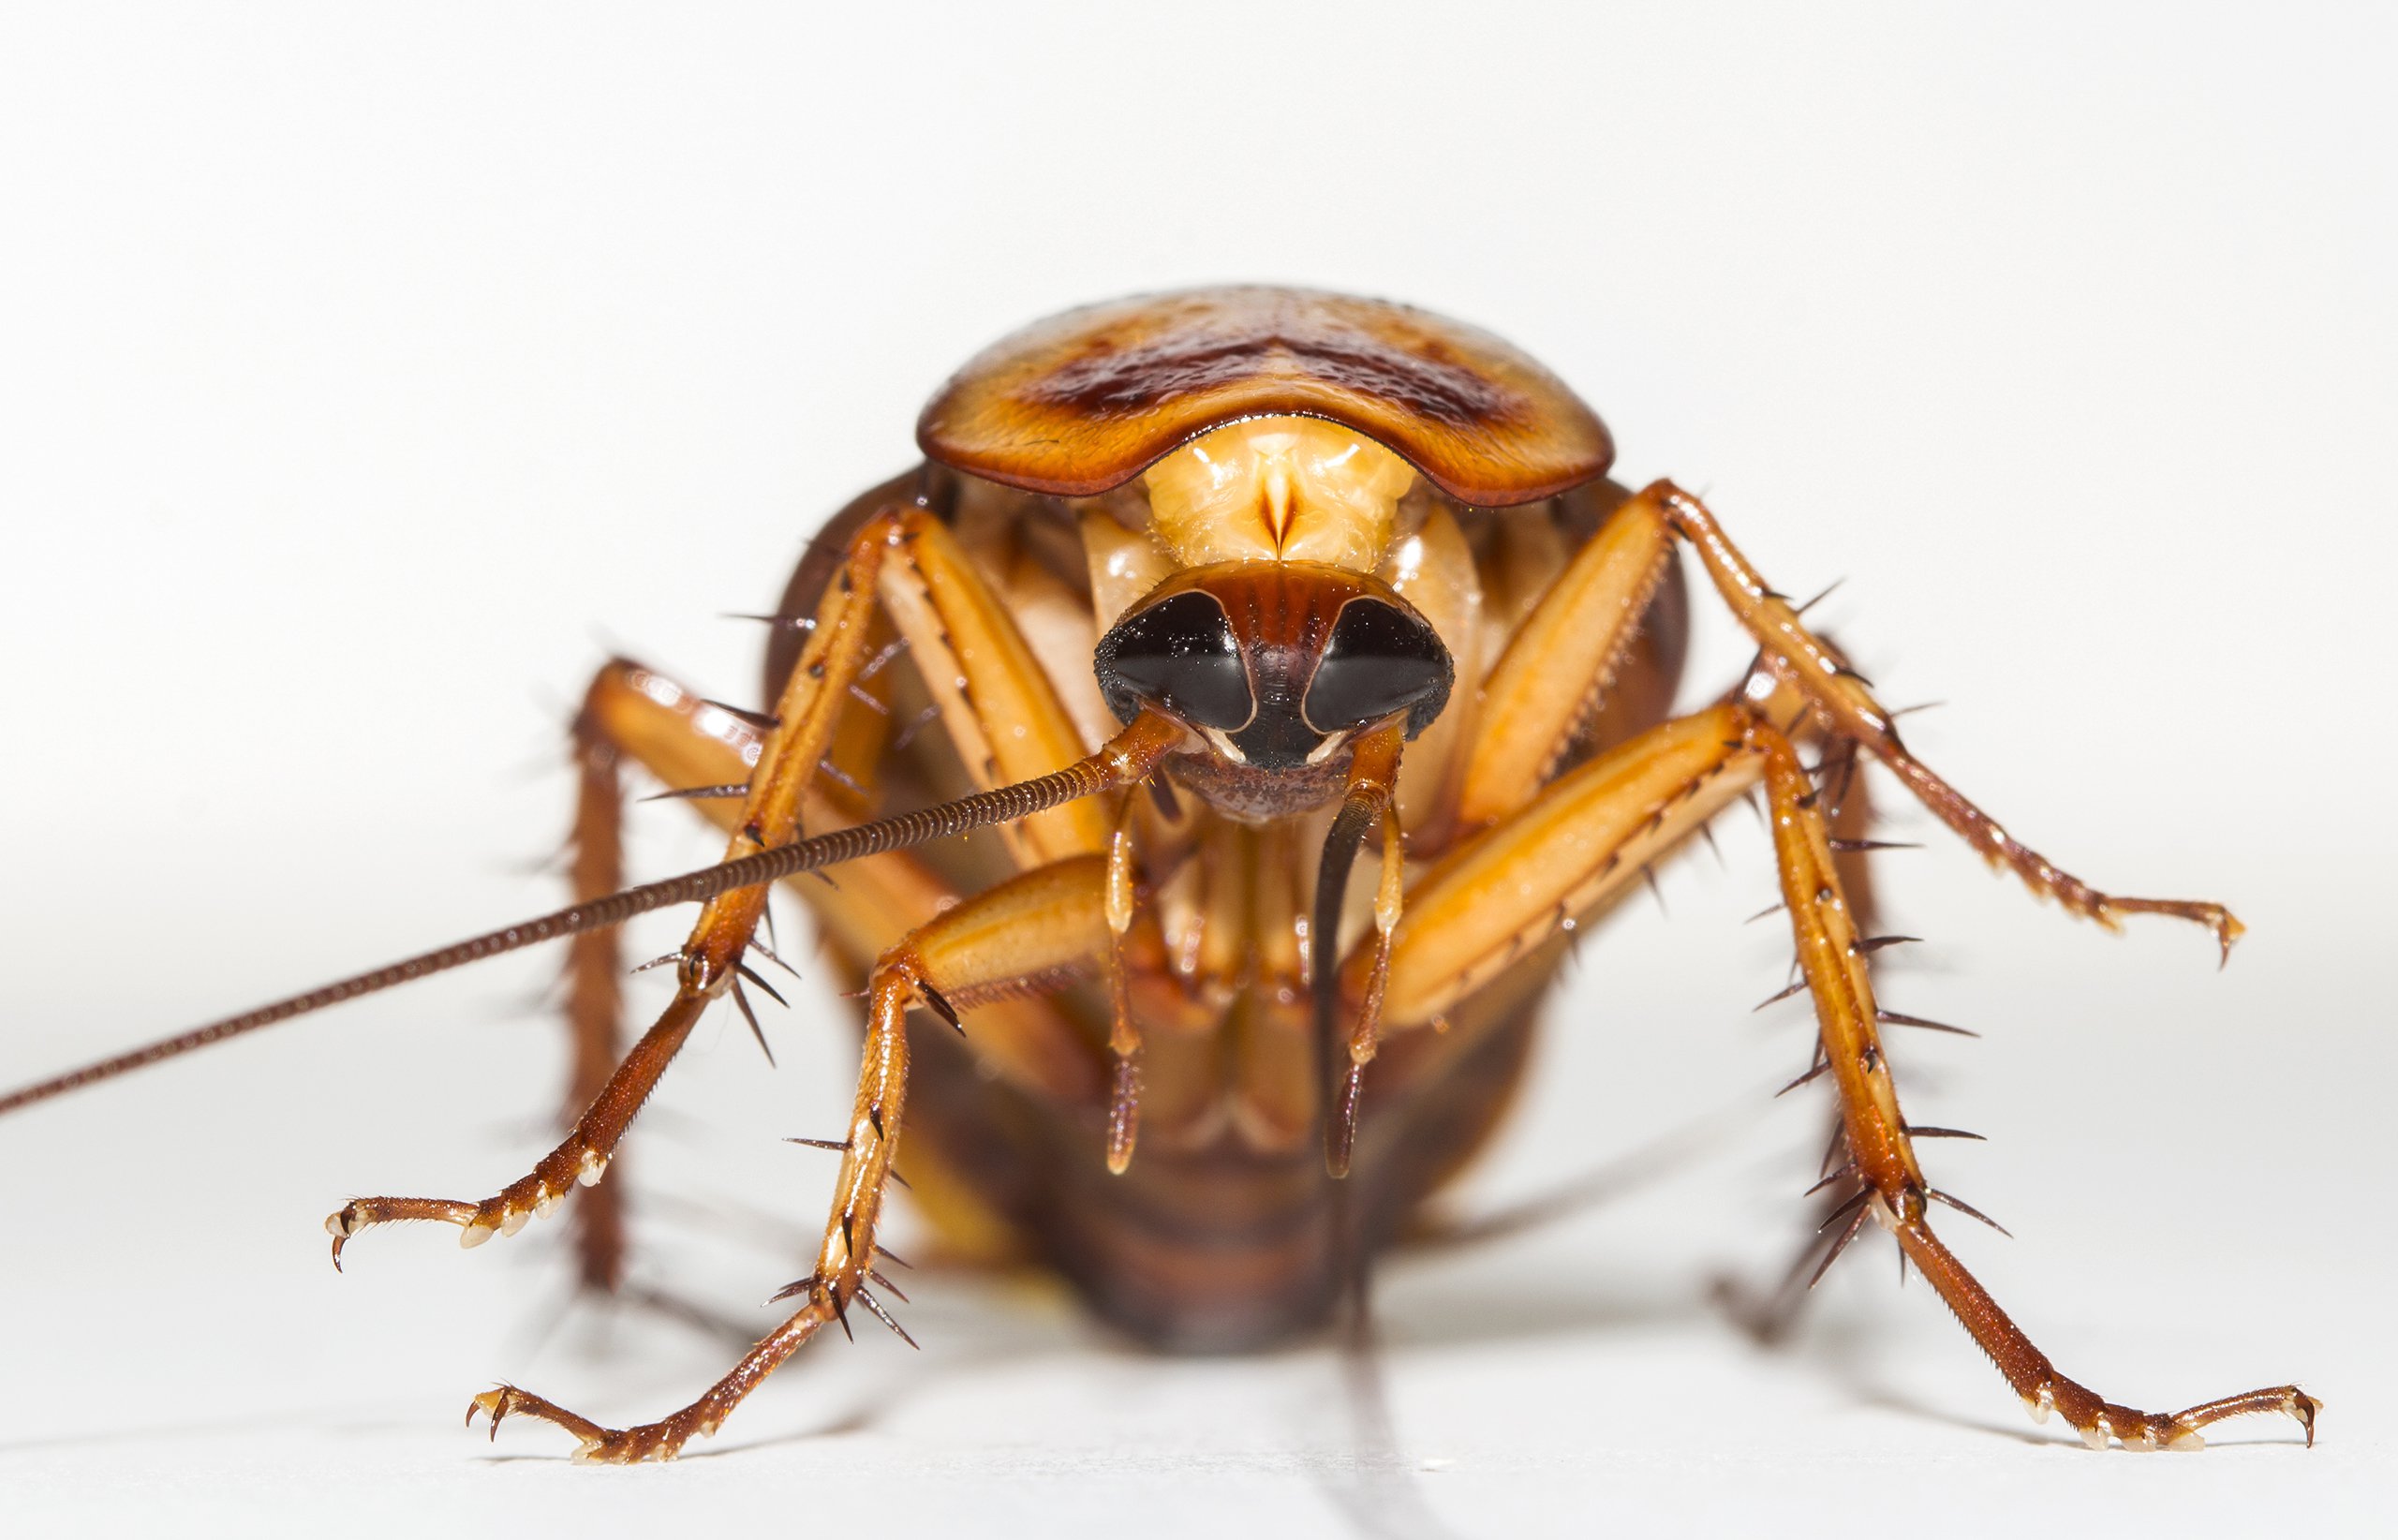 Cockroach Milk Could Be Good for You, Scientists Say | Time